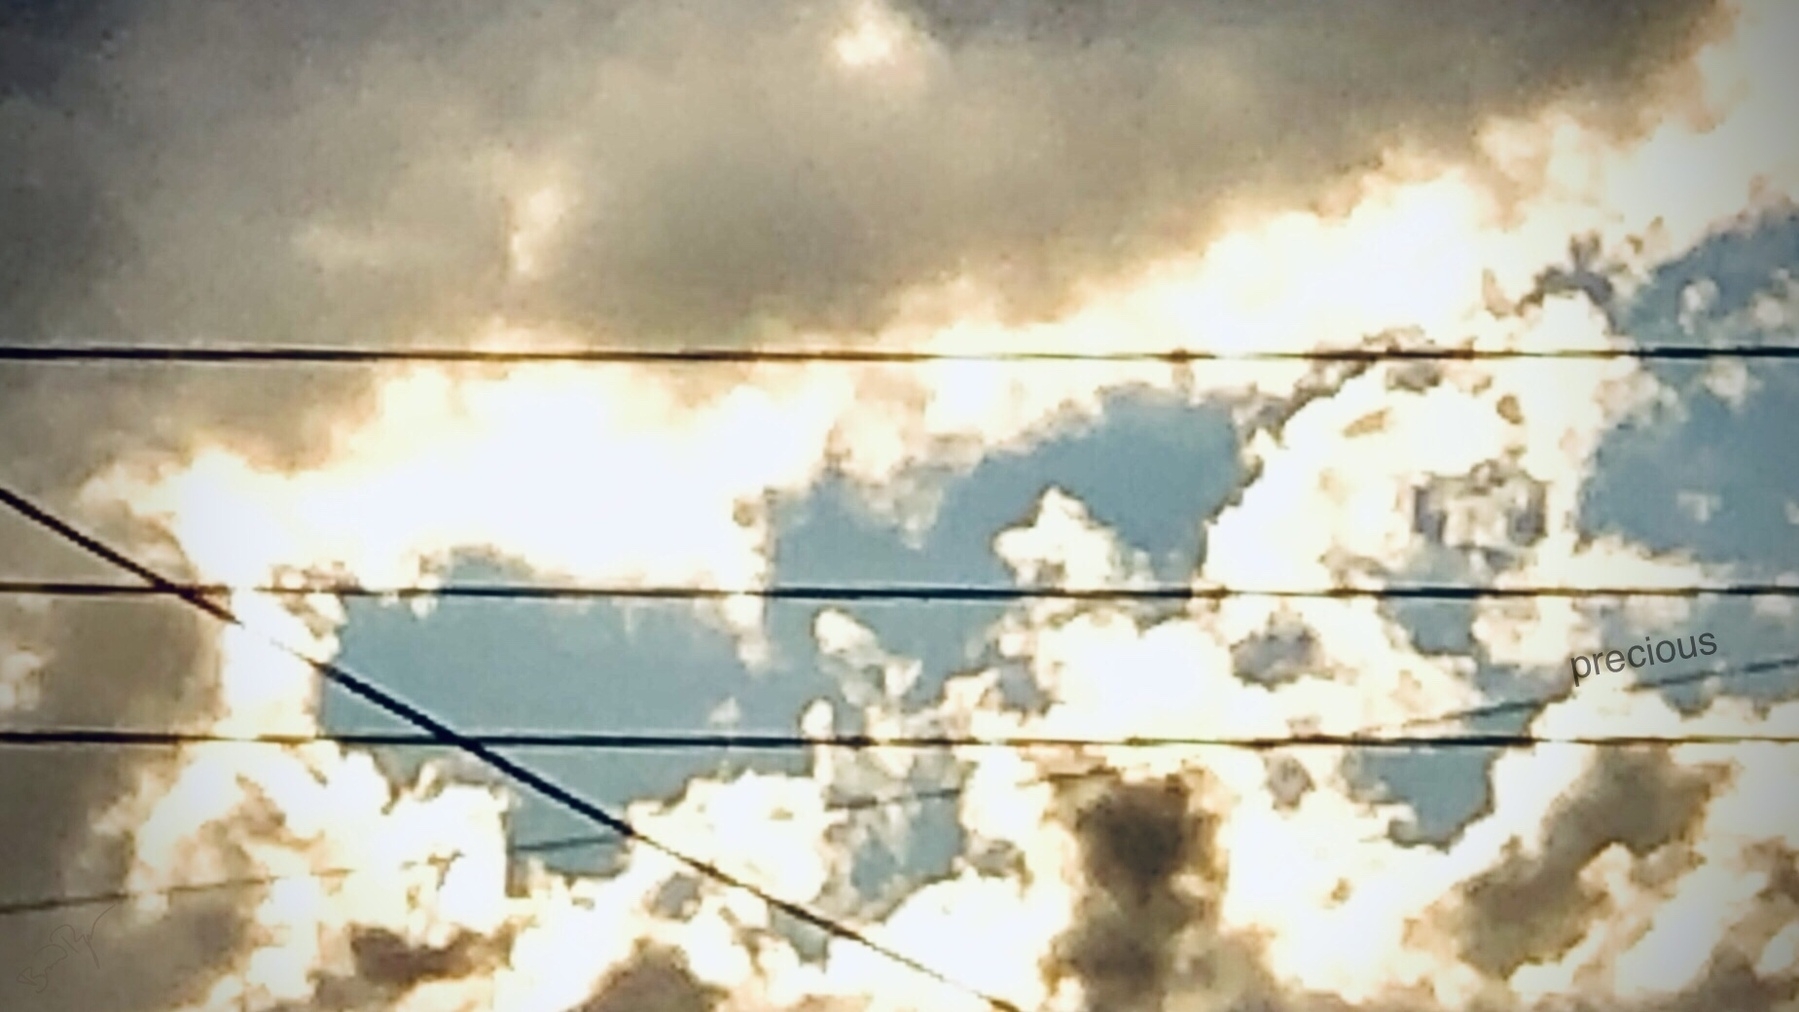 Dark clouds with sunshine lining and power lines criss-crossing. The question is which is more precious, the sun or the powergrid? 